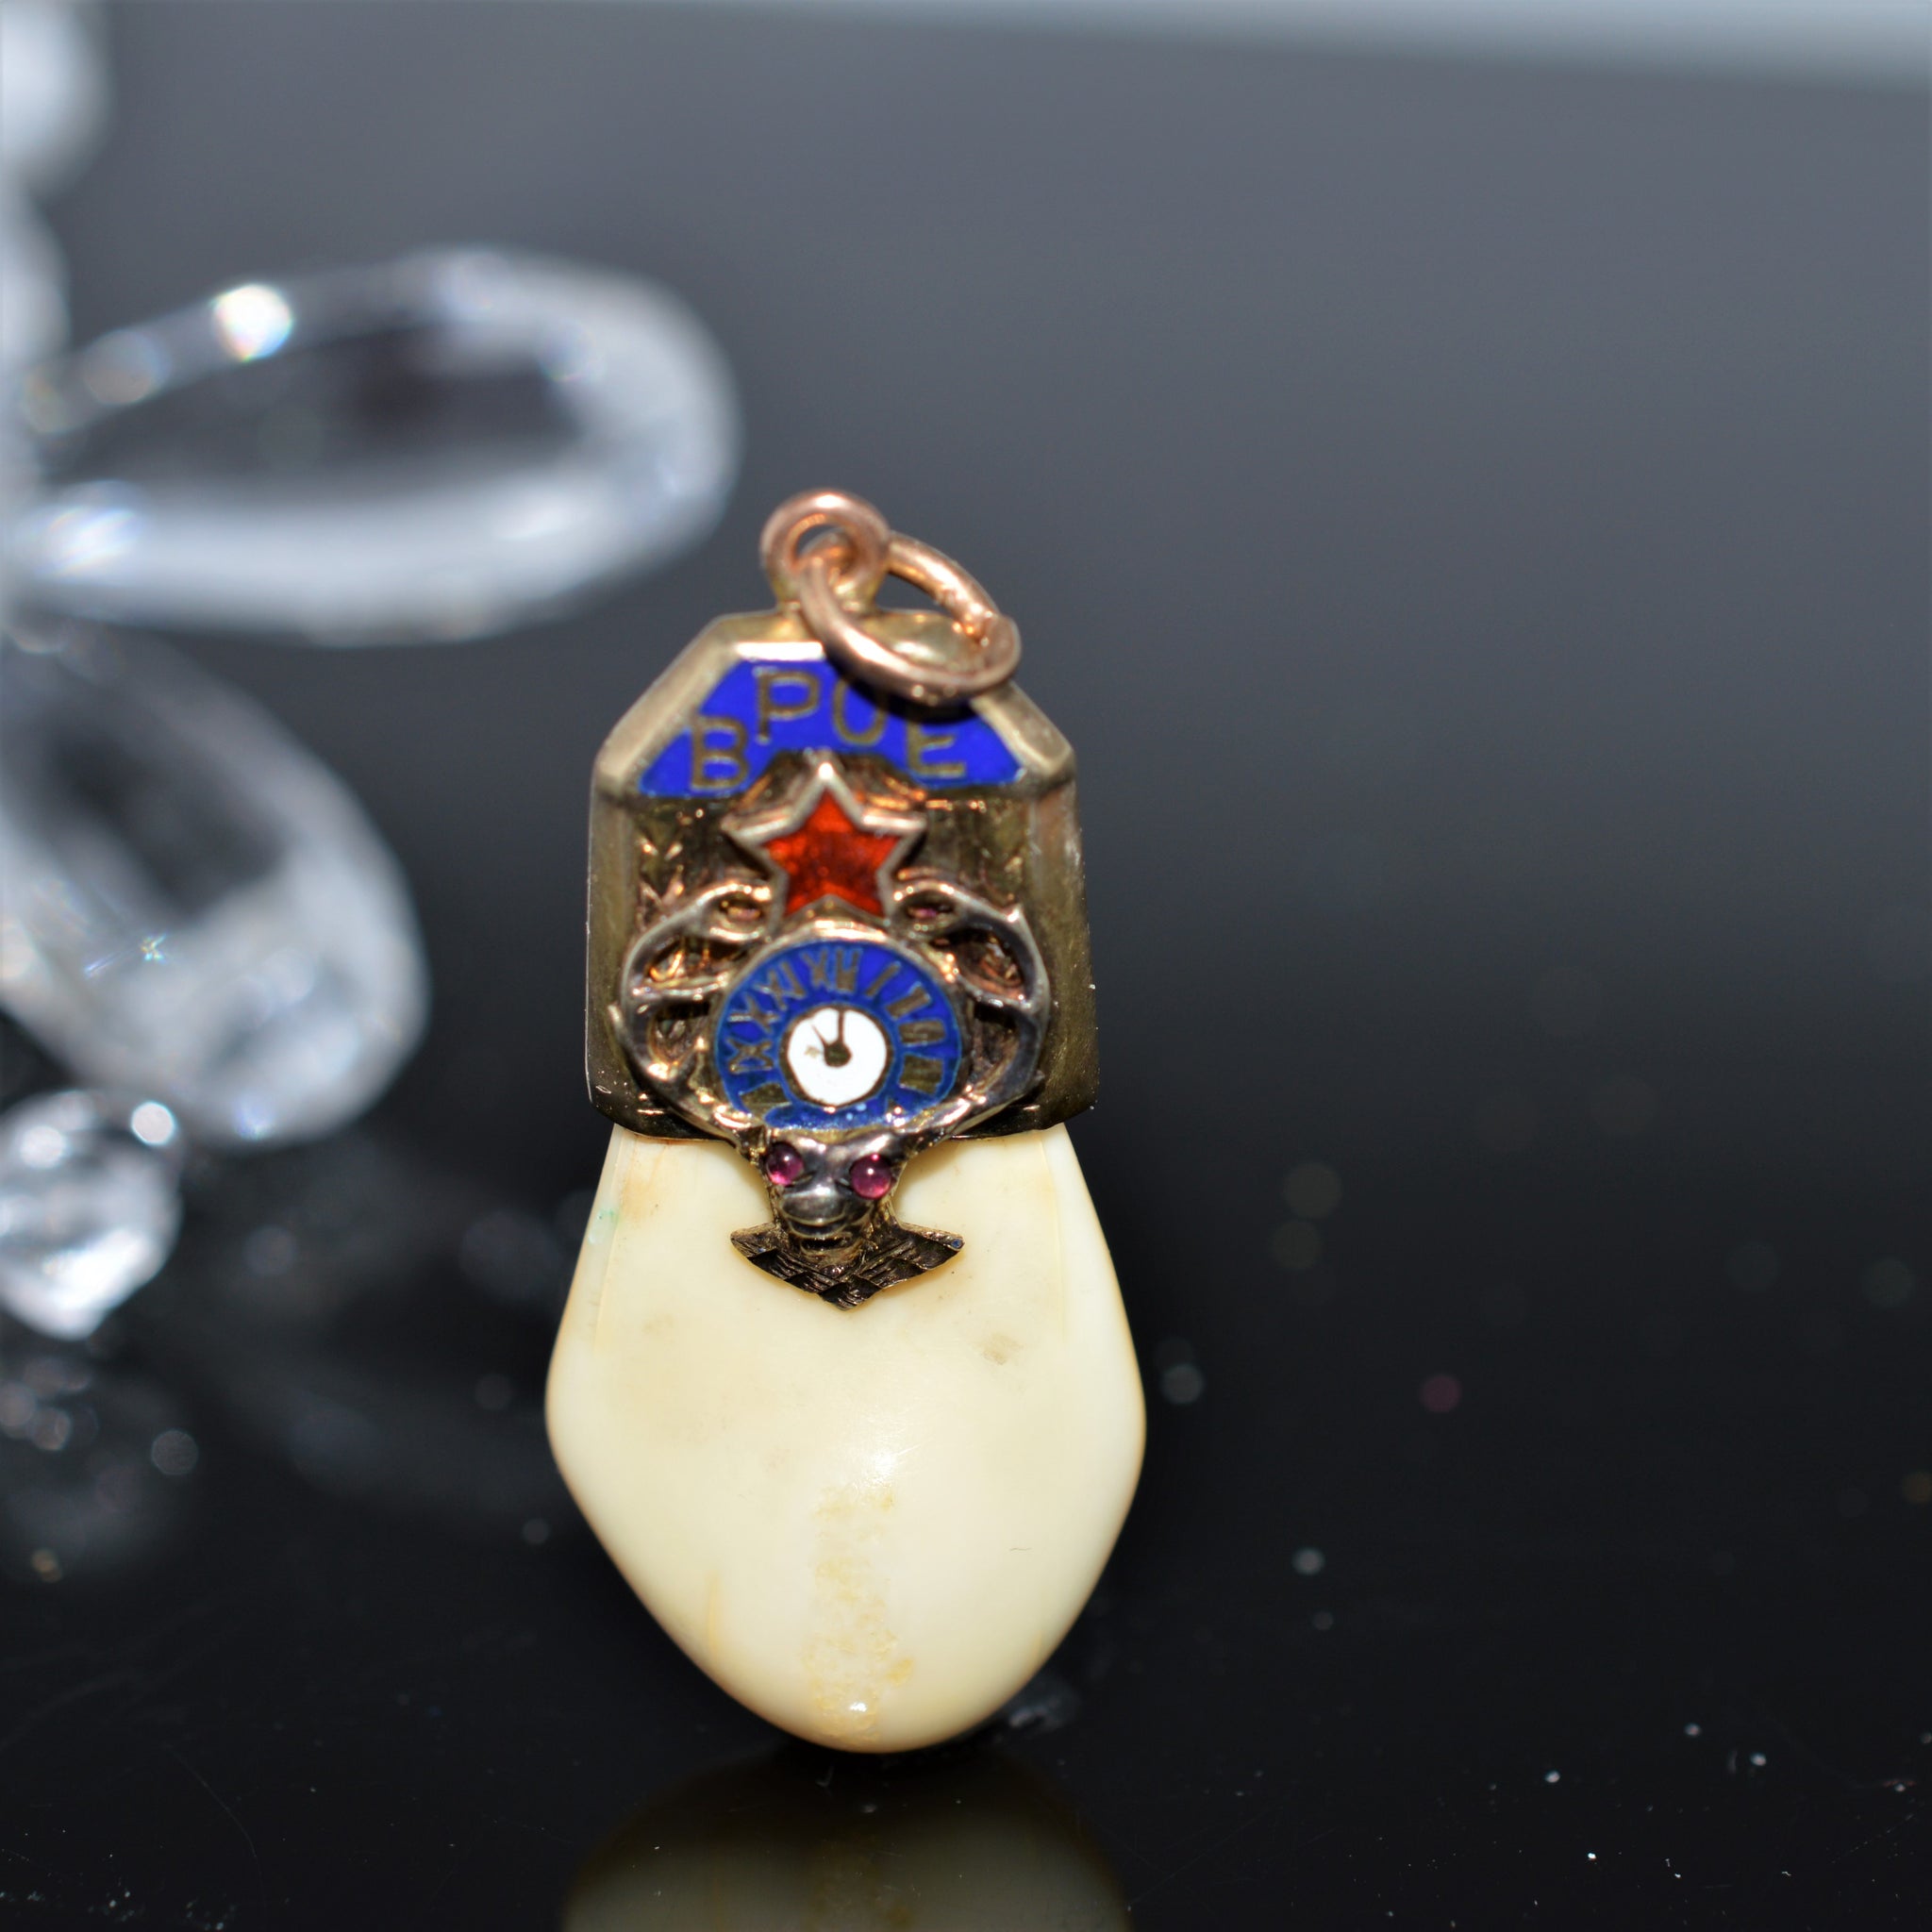 Elk Ivory Jewelry | Custom Gold and Silver Jewelry, Elk Tooth Jewelry | Elk  ivory jewelry, Teeth jewelry, Elk ivory necklace